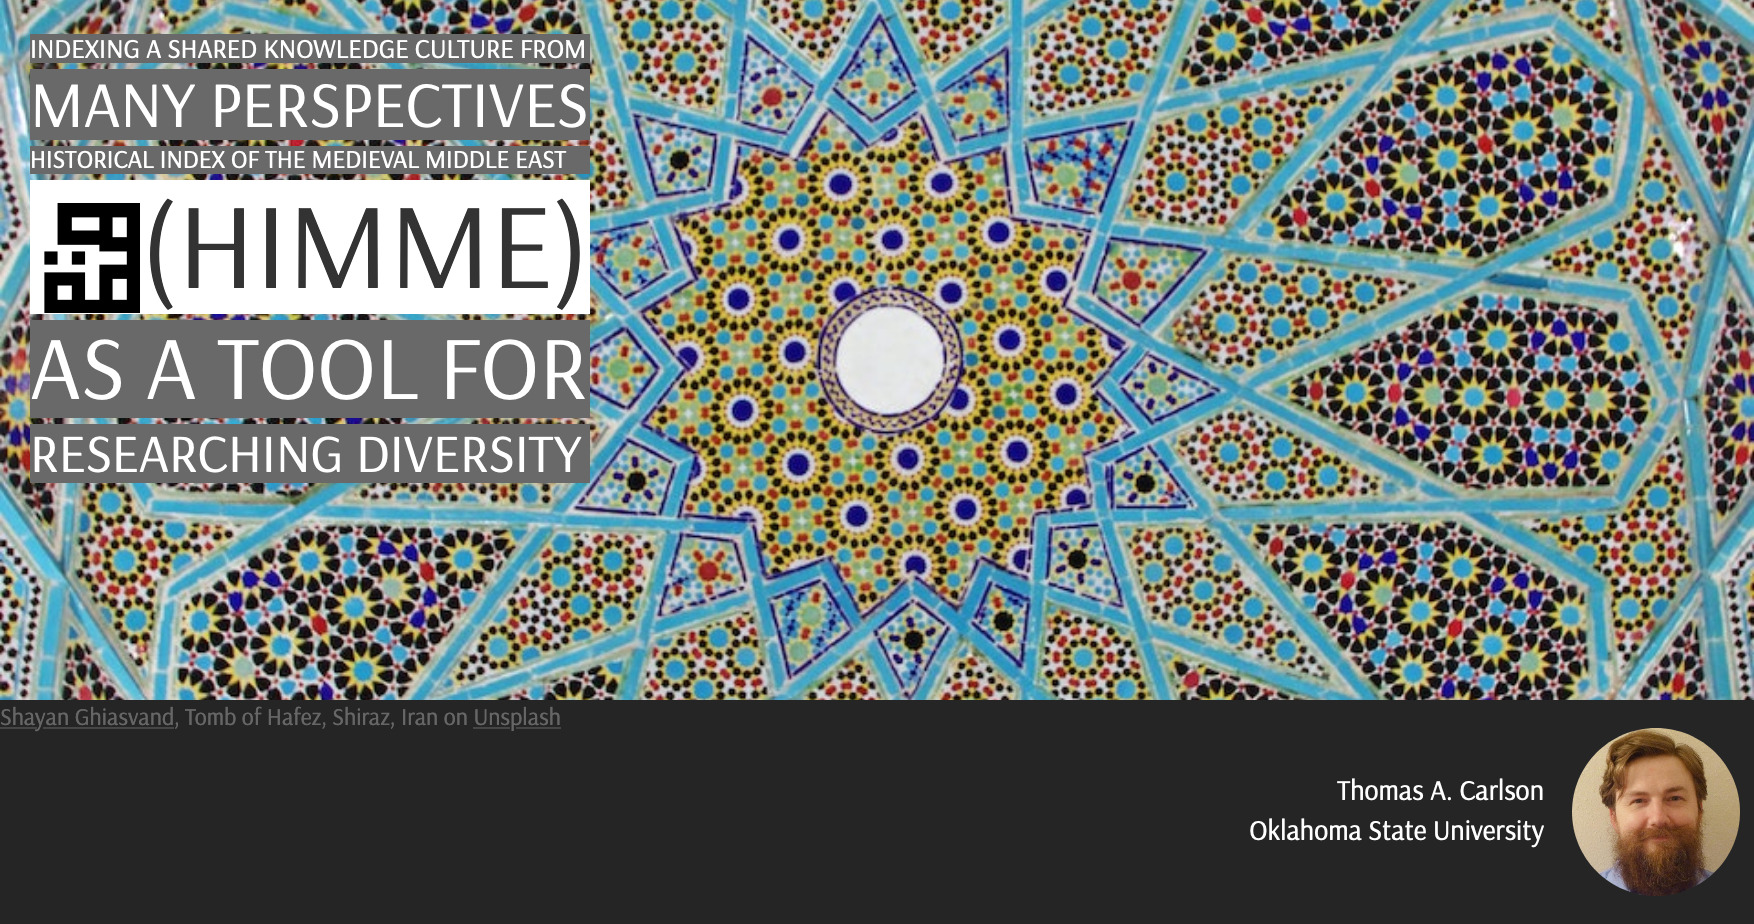 Indexing a Shared Knowledge Culture from Many Perspectives: Historical Index of the Medieval Middle East (HIMME) as a Tool for Researching Diversity